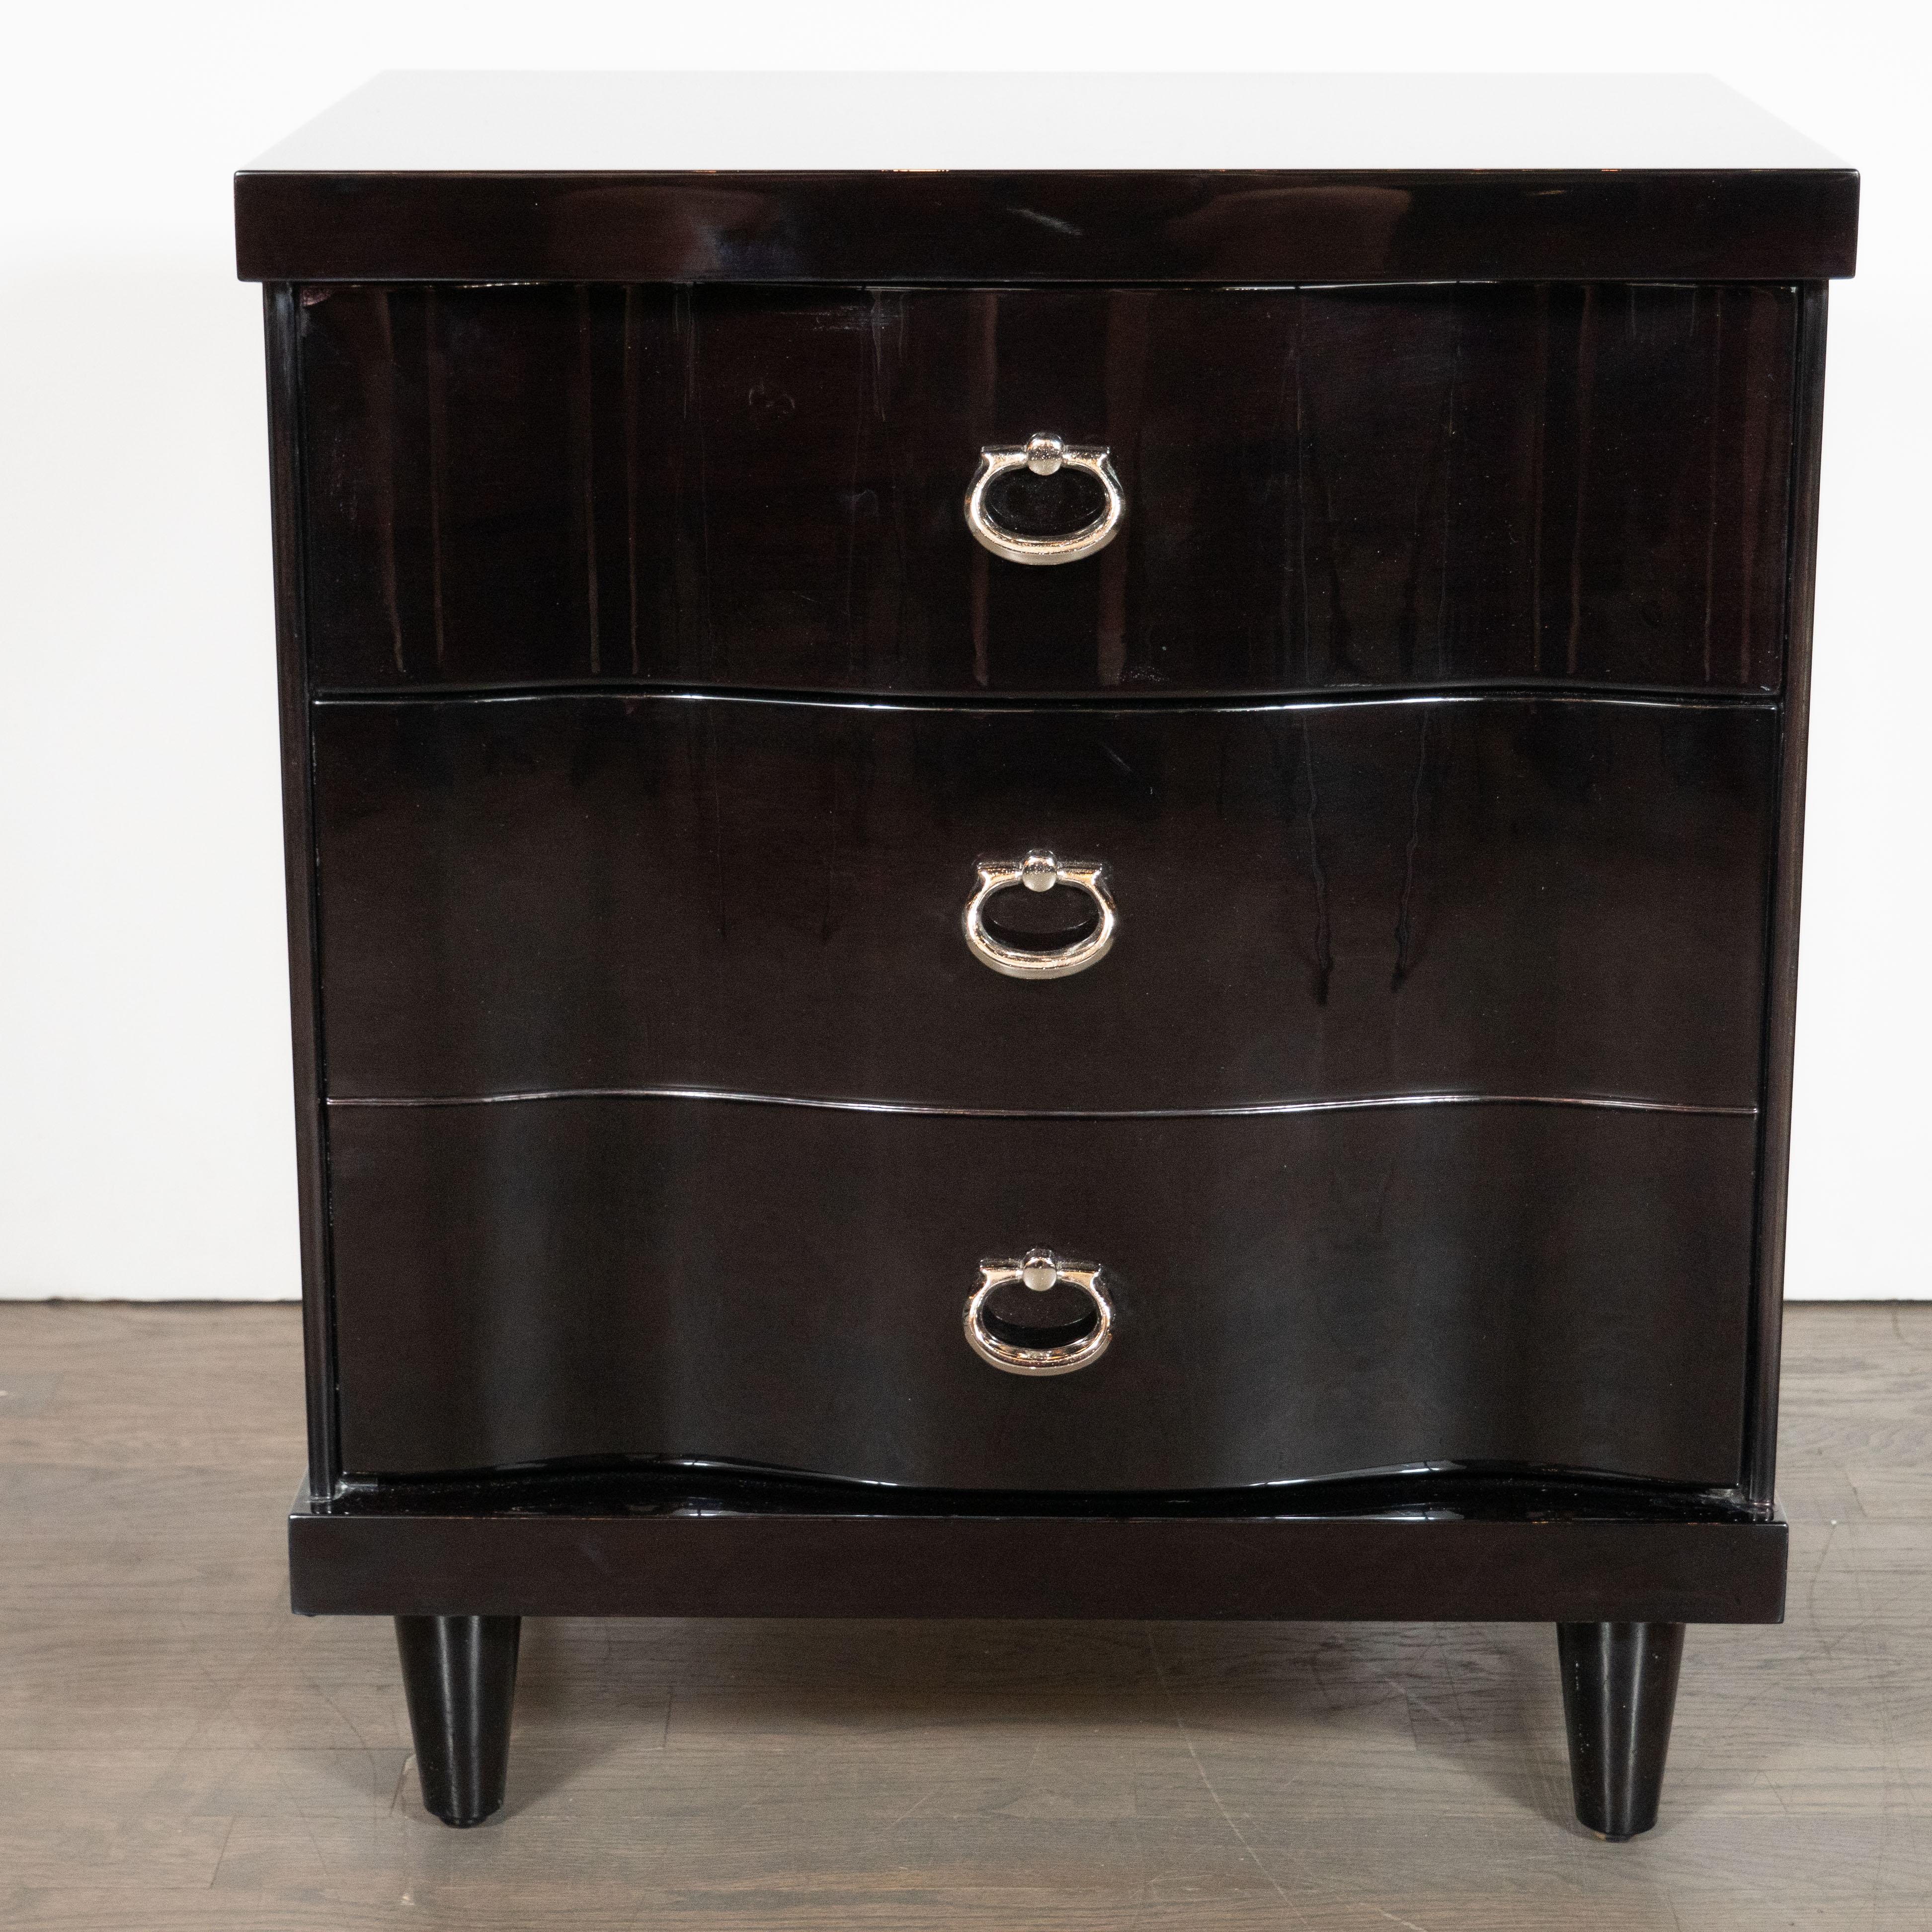 This pair of Mid-Century Modern nightstands was designed in the United States, circa 1950. The nightstands each have a minimal ebonized walnut frame supported by four tapered legs. Inset within each frame are three, stacked undulating bowfront